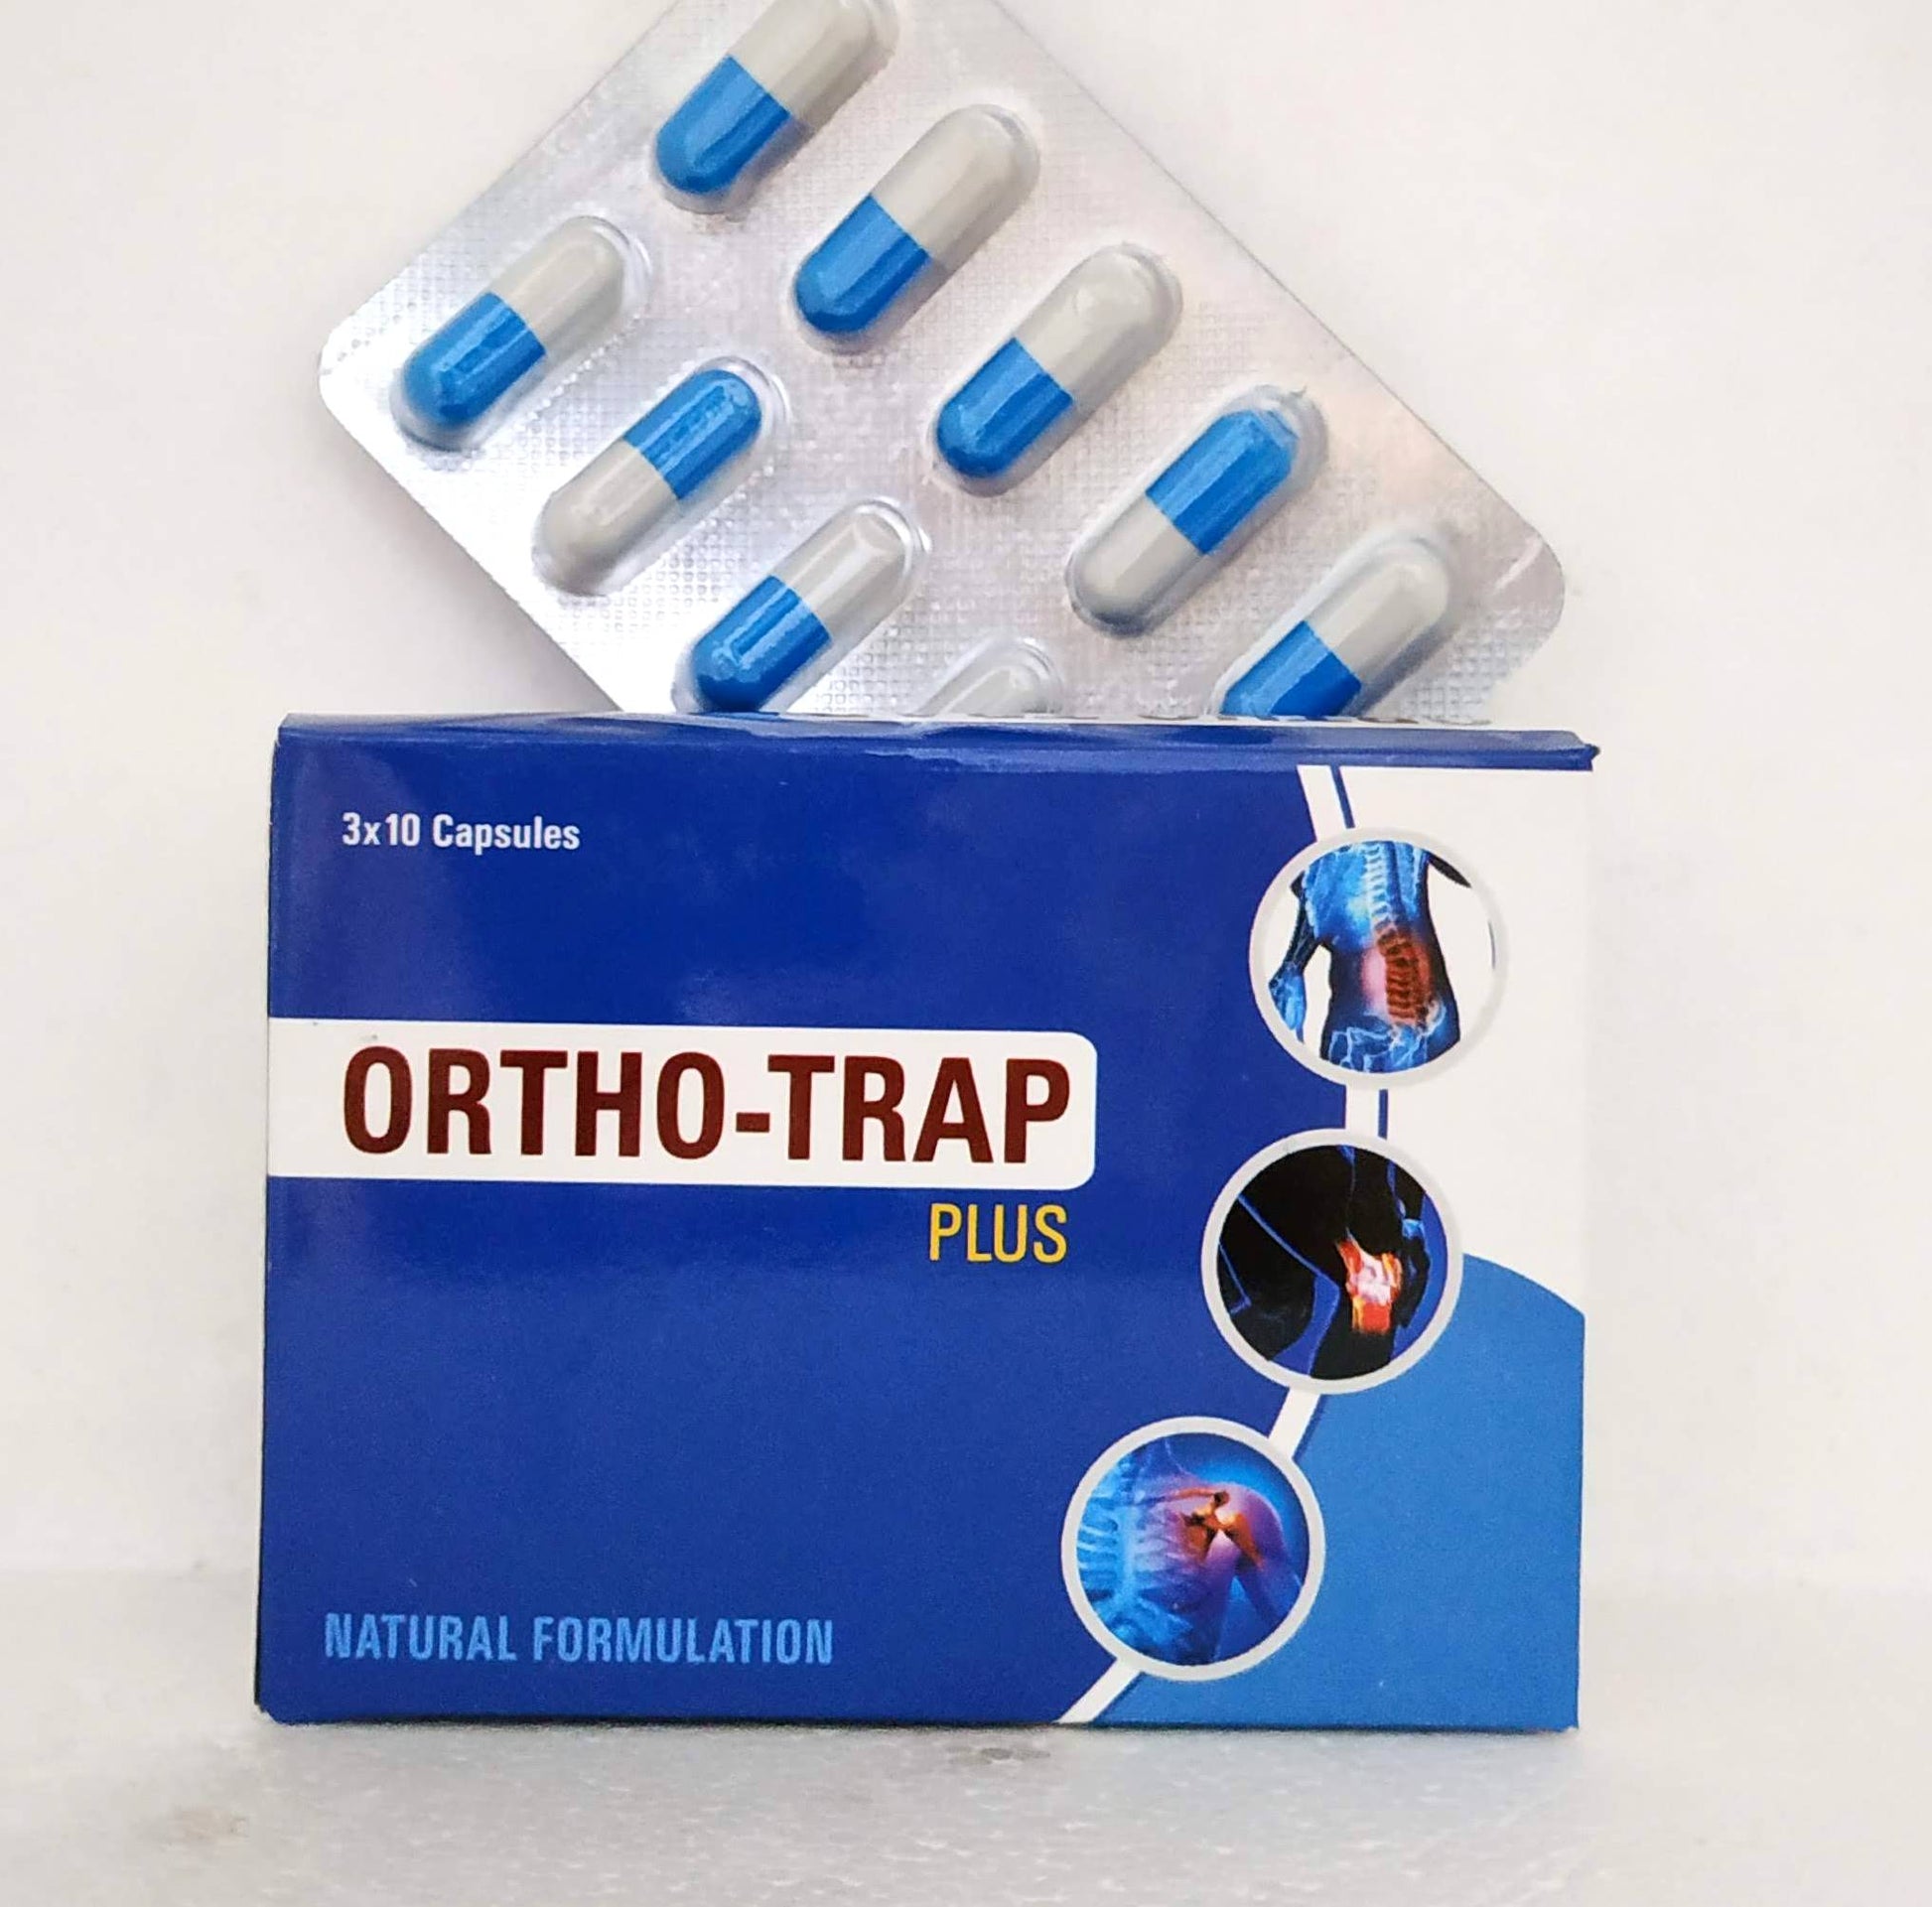 Shop Ortho-Trap Plus Capsules - 10Capsules at price 85.00 from Health orbit Online - Ayush Care